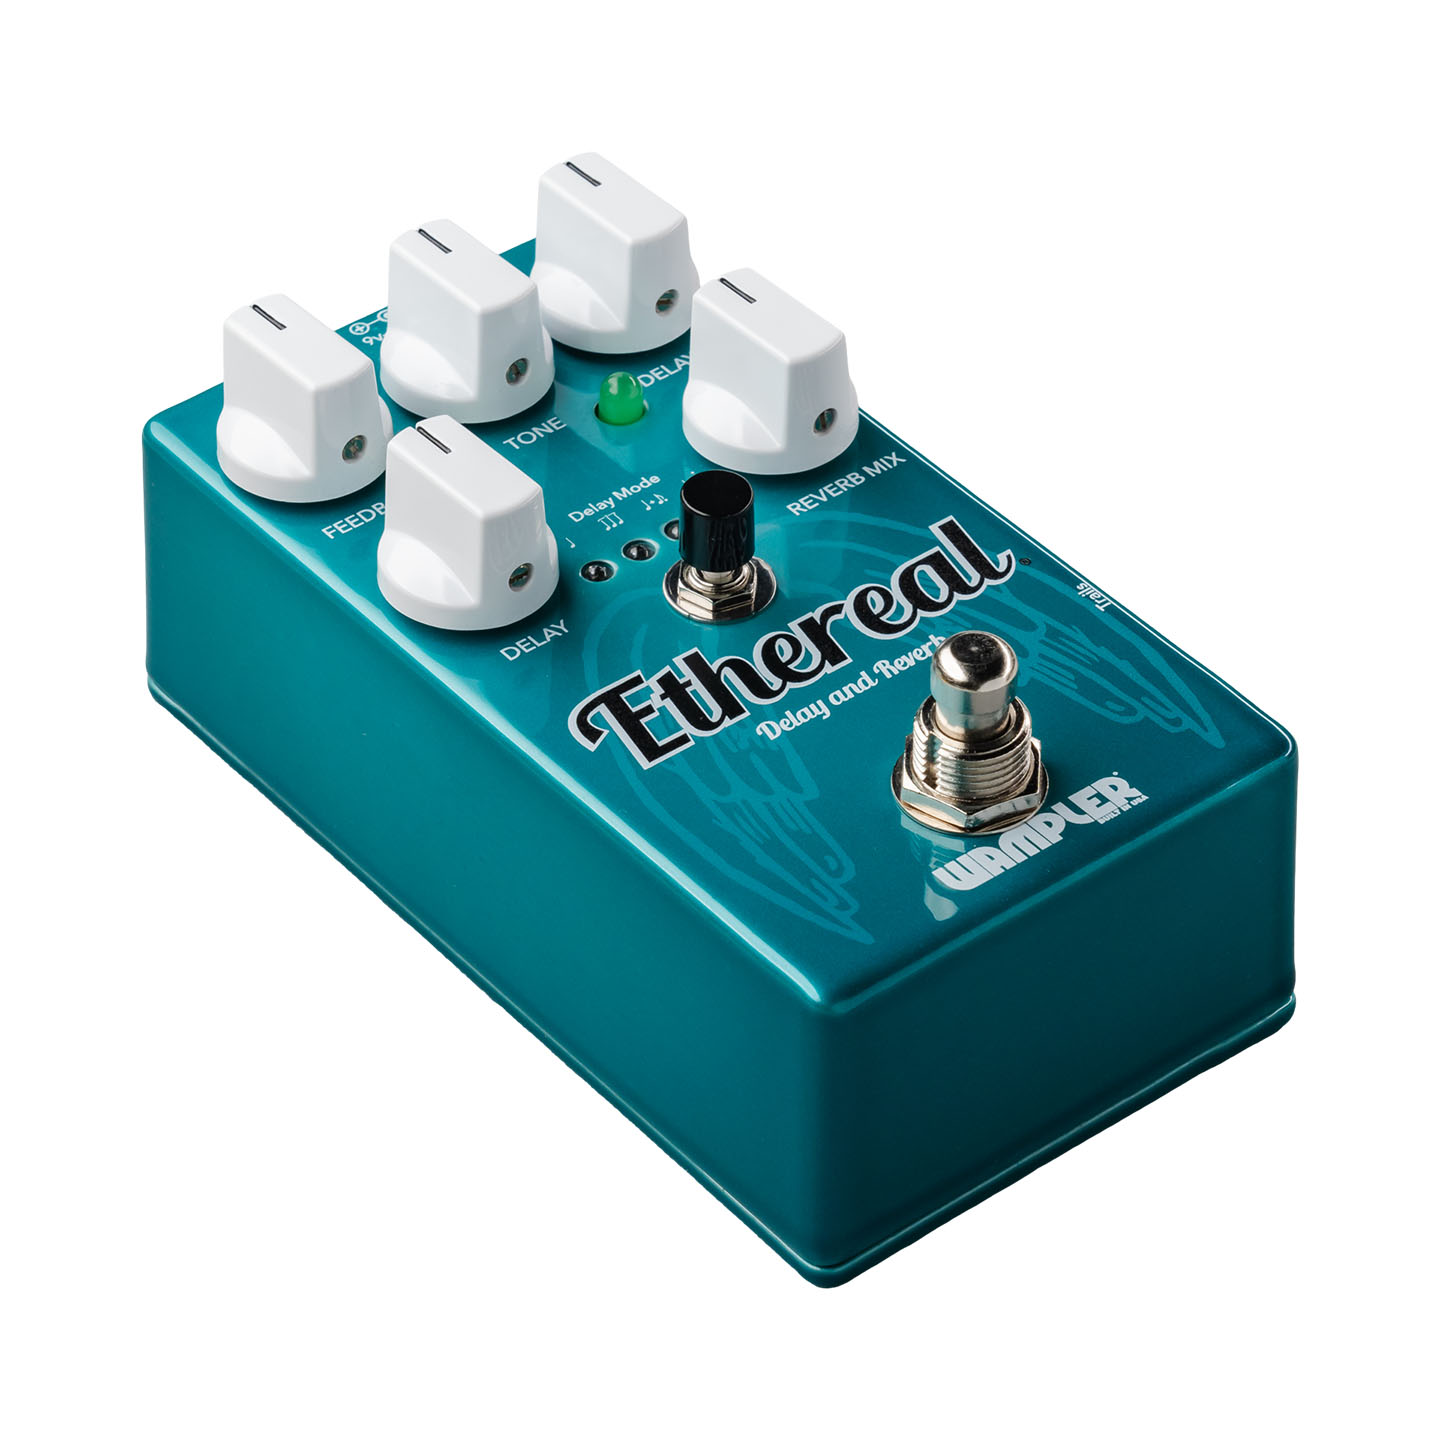 Ethereal - Reverb and Delay Pedal